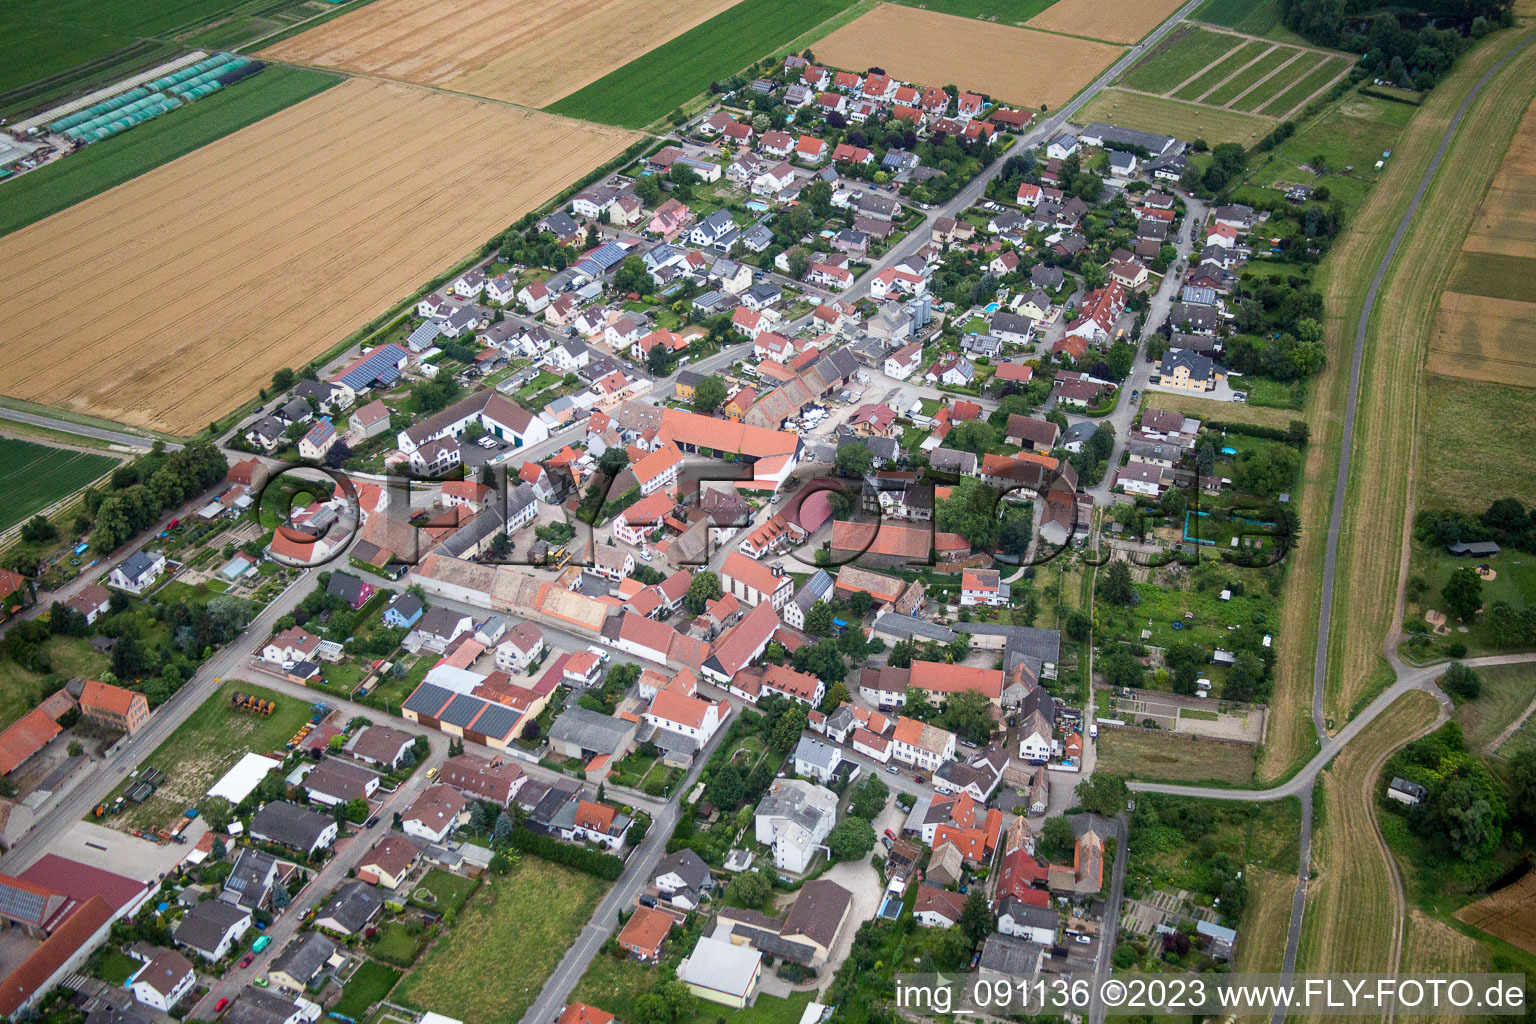 Aerial photograpy of District Ibersheim in Worms in the state Rhineland-Palatinate, Germany